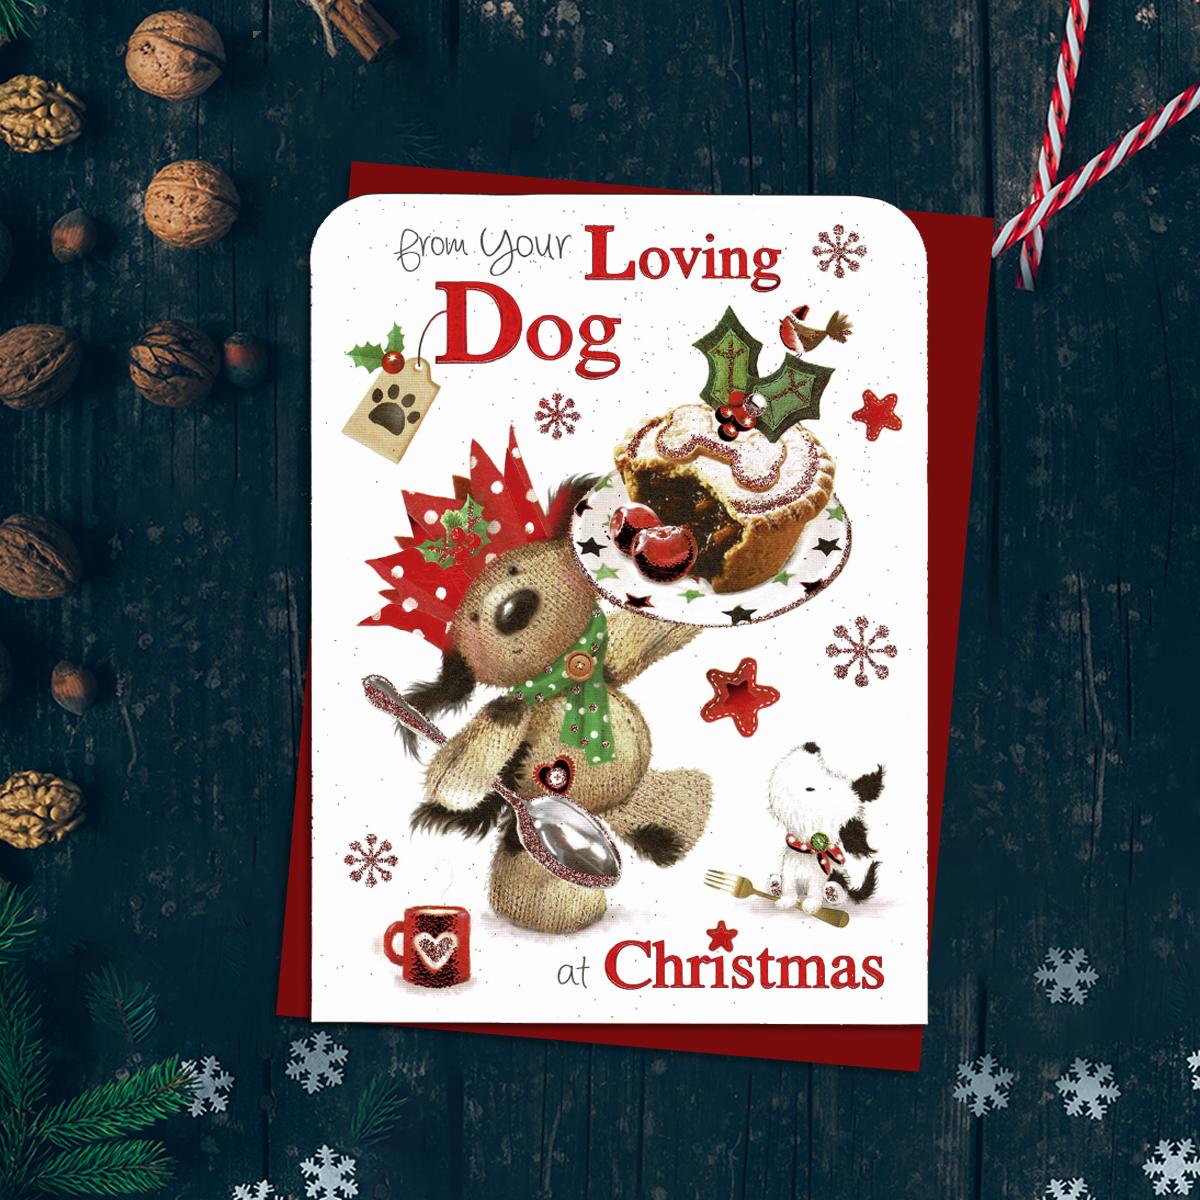 From Your Loving Dog At Christmas Featuring A Cute Dog With Huge Mince Pie! Finished With Red Foiled Lettering, Red Glitter Detail And Red Envelope